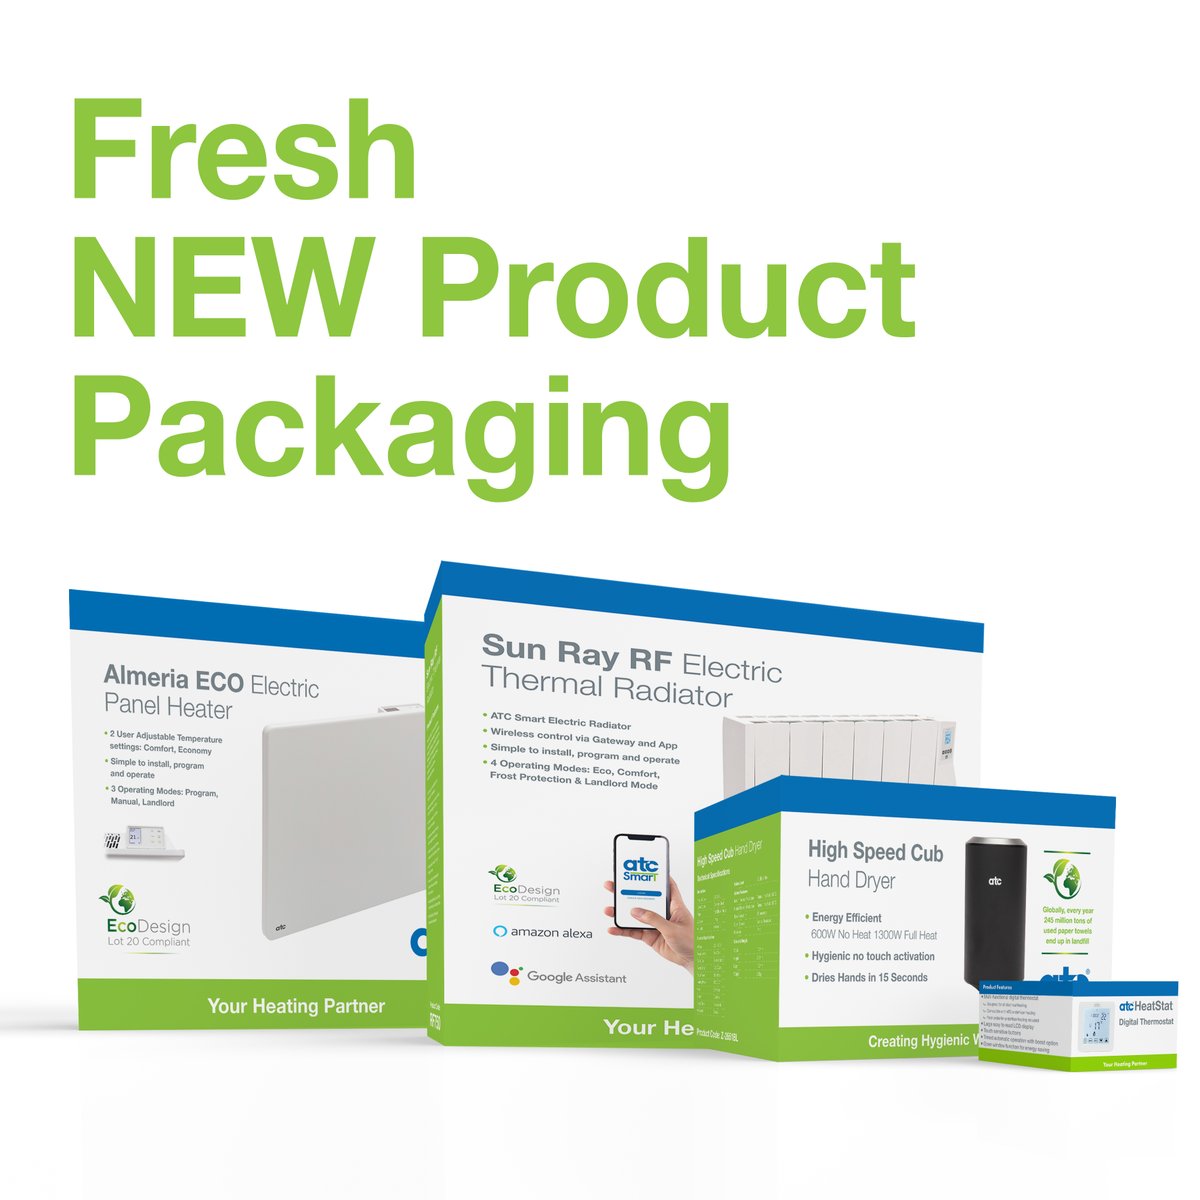 Introducing Fresh NEW Product Packaging! 📣

We are pleased to announce the roll out of fresh new product packaging!

#atcelectrical #yourheatingpartner #energythroughpeople #electricheating #branding